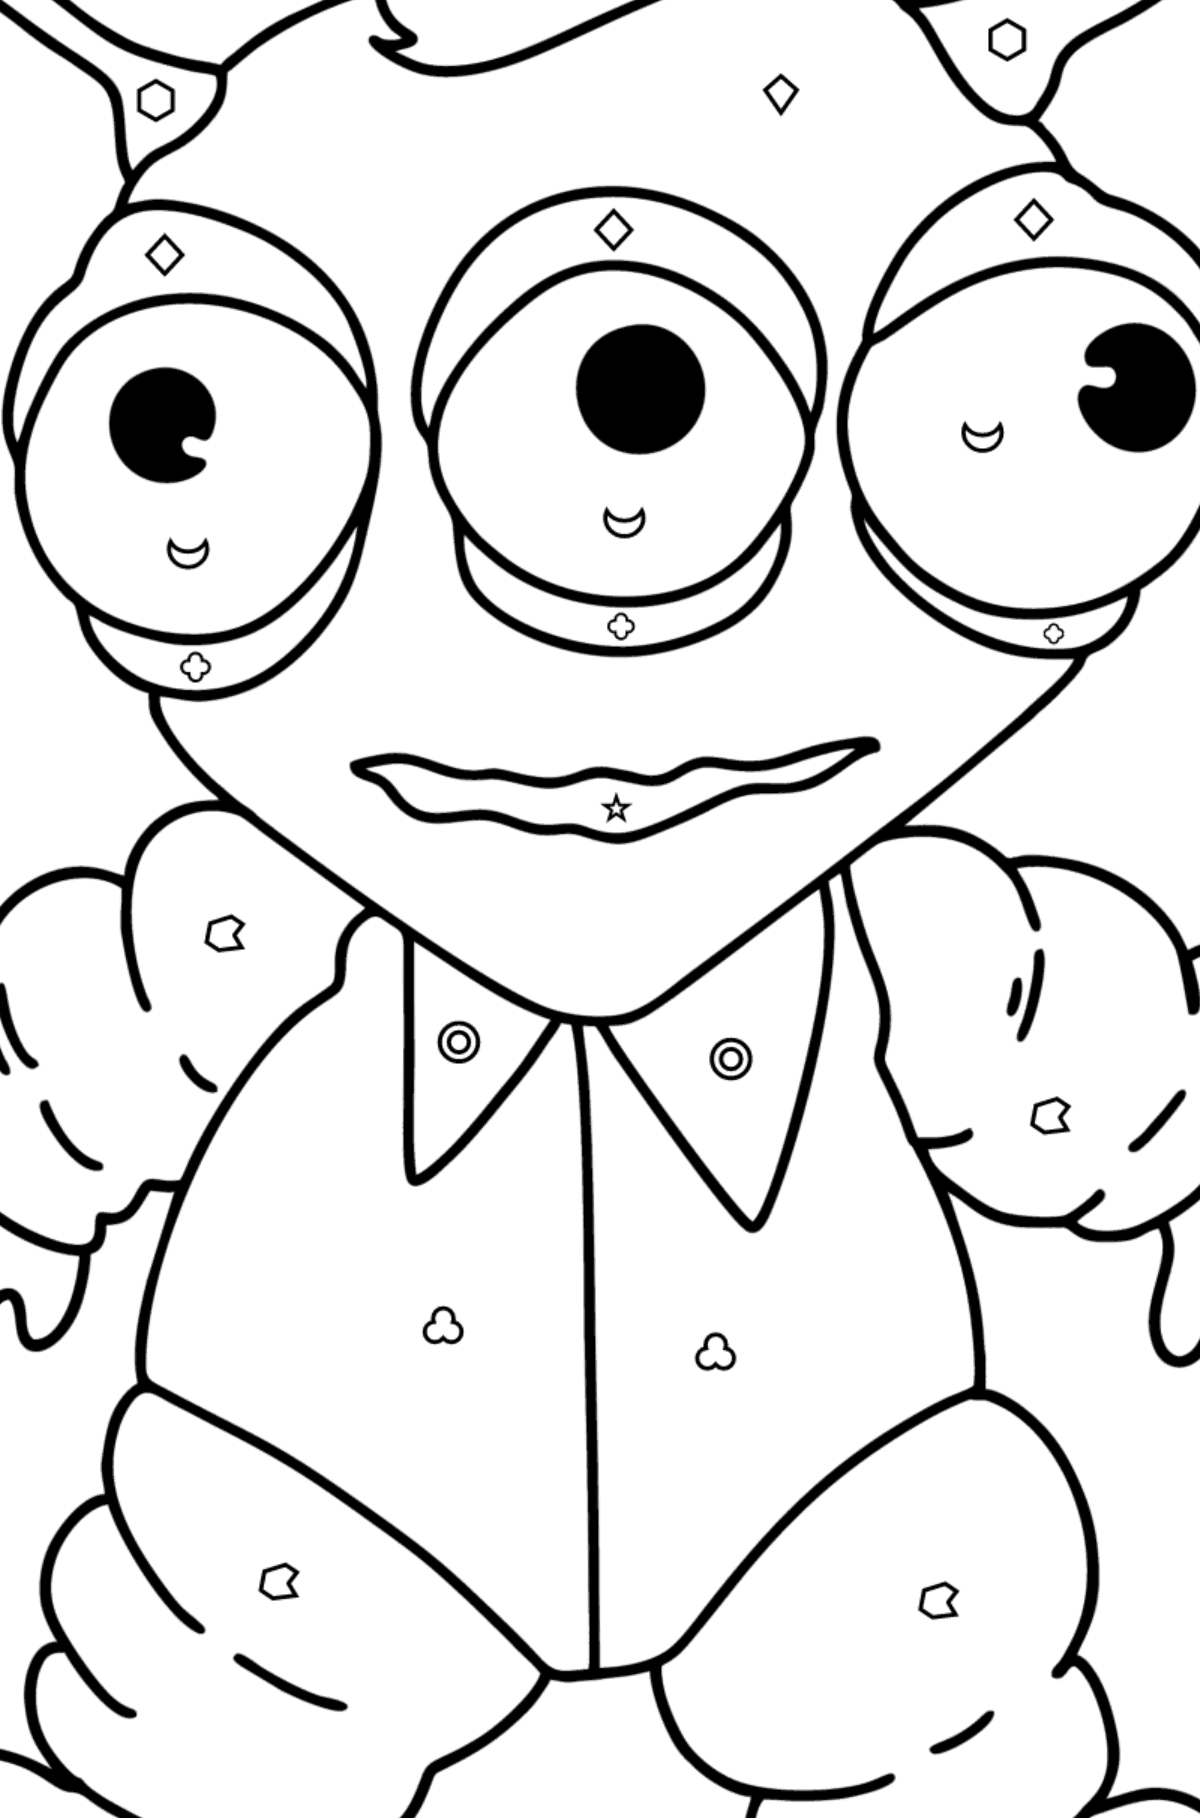 Cartoon Alien Coloring page - Coloring by Geometric Shapes for Kids